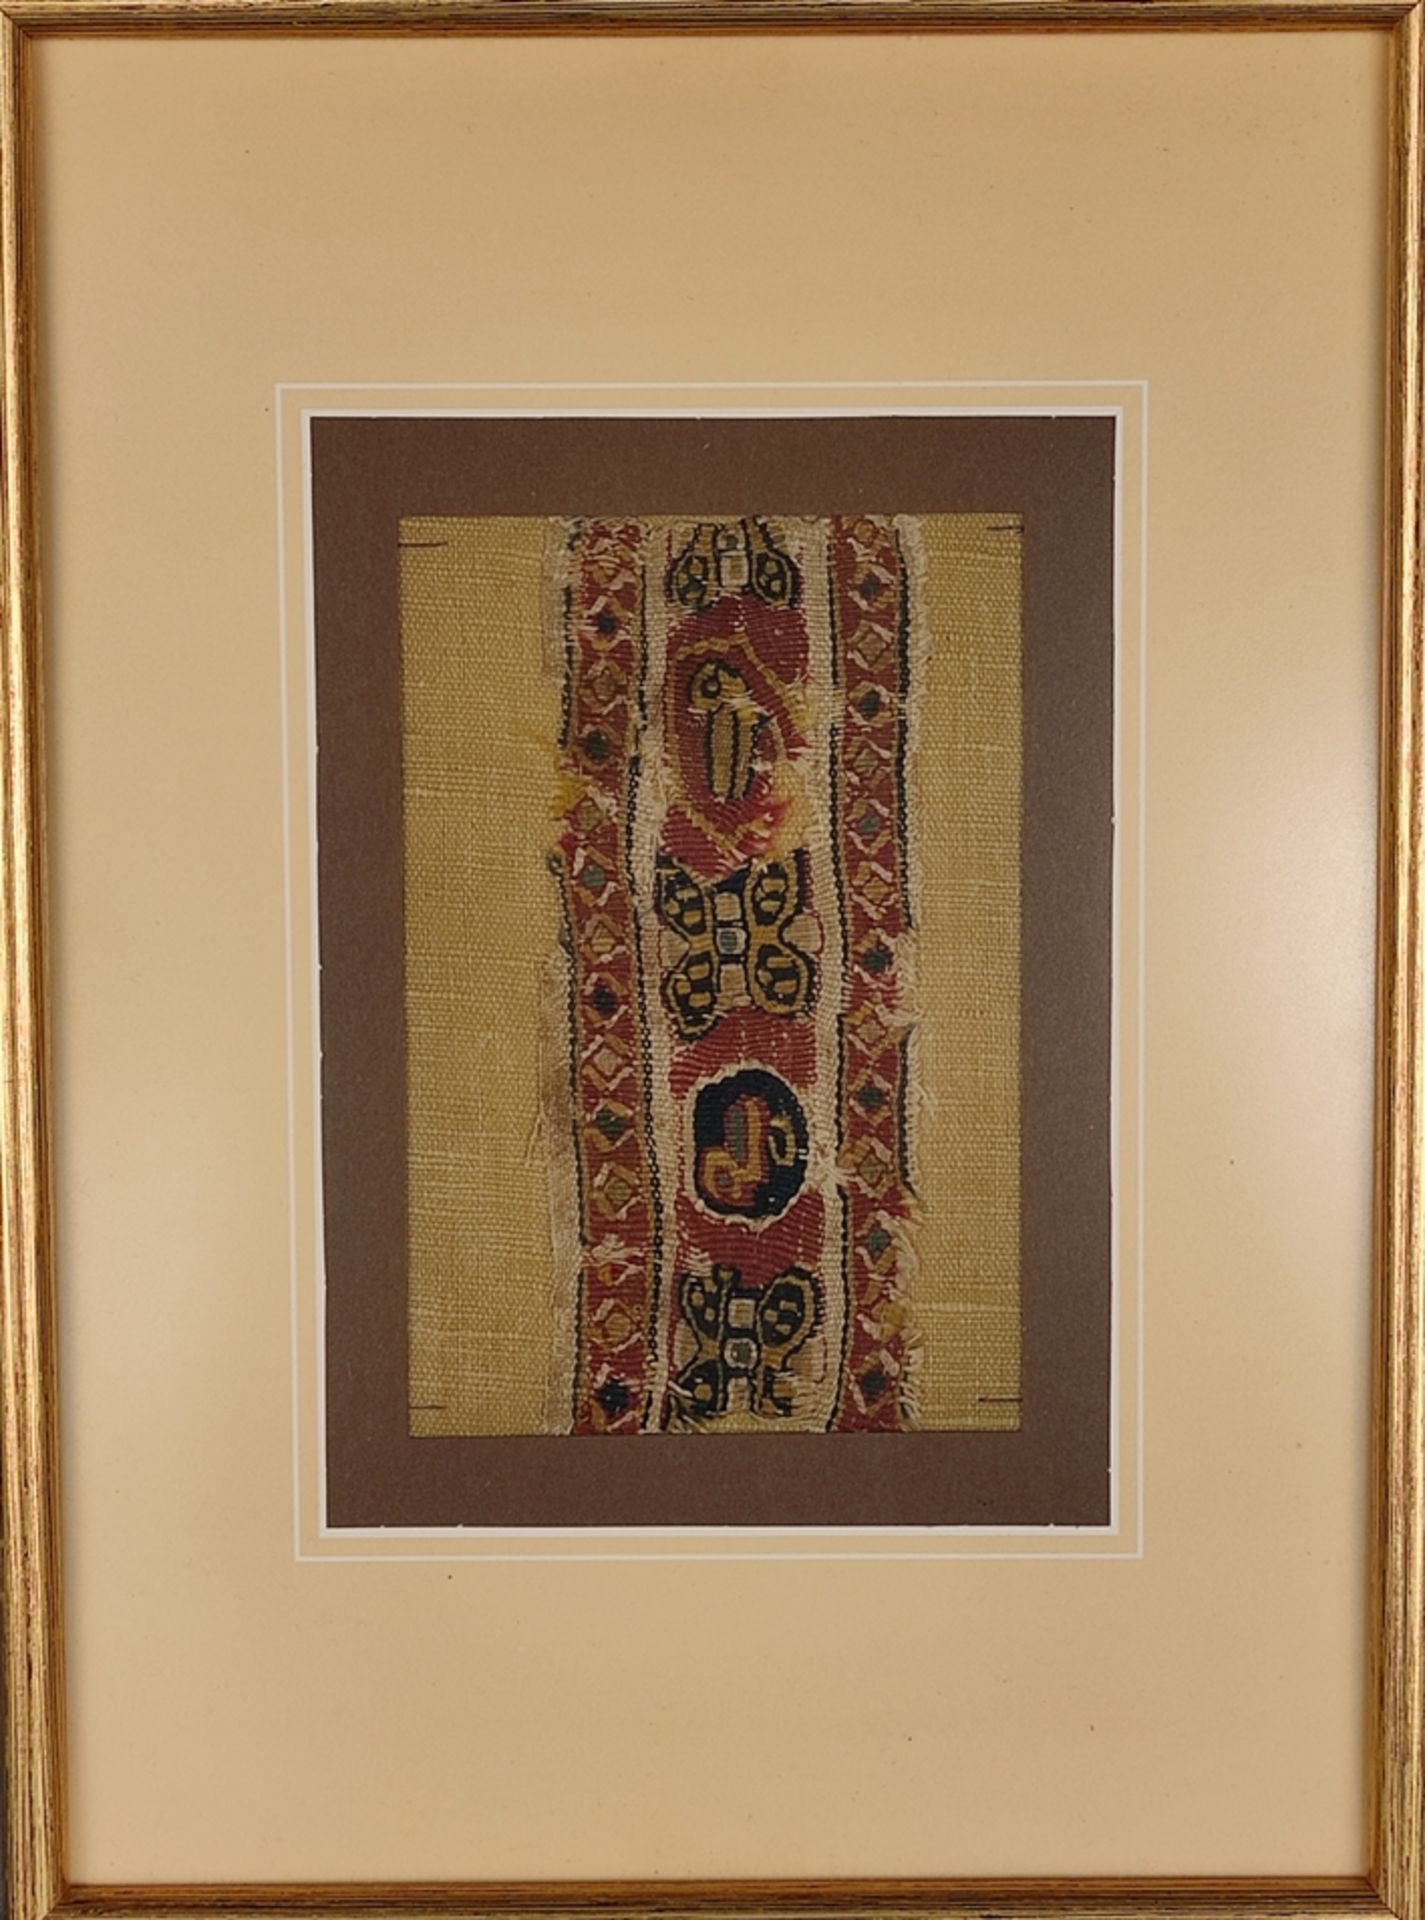 Textile fragment, Coptic, piece of cloth framed in frame, 13,5x5,5cm, 30x21,5cm with frame - Image 2 of 2